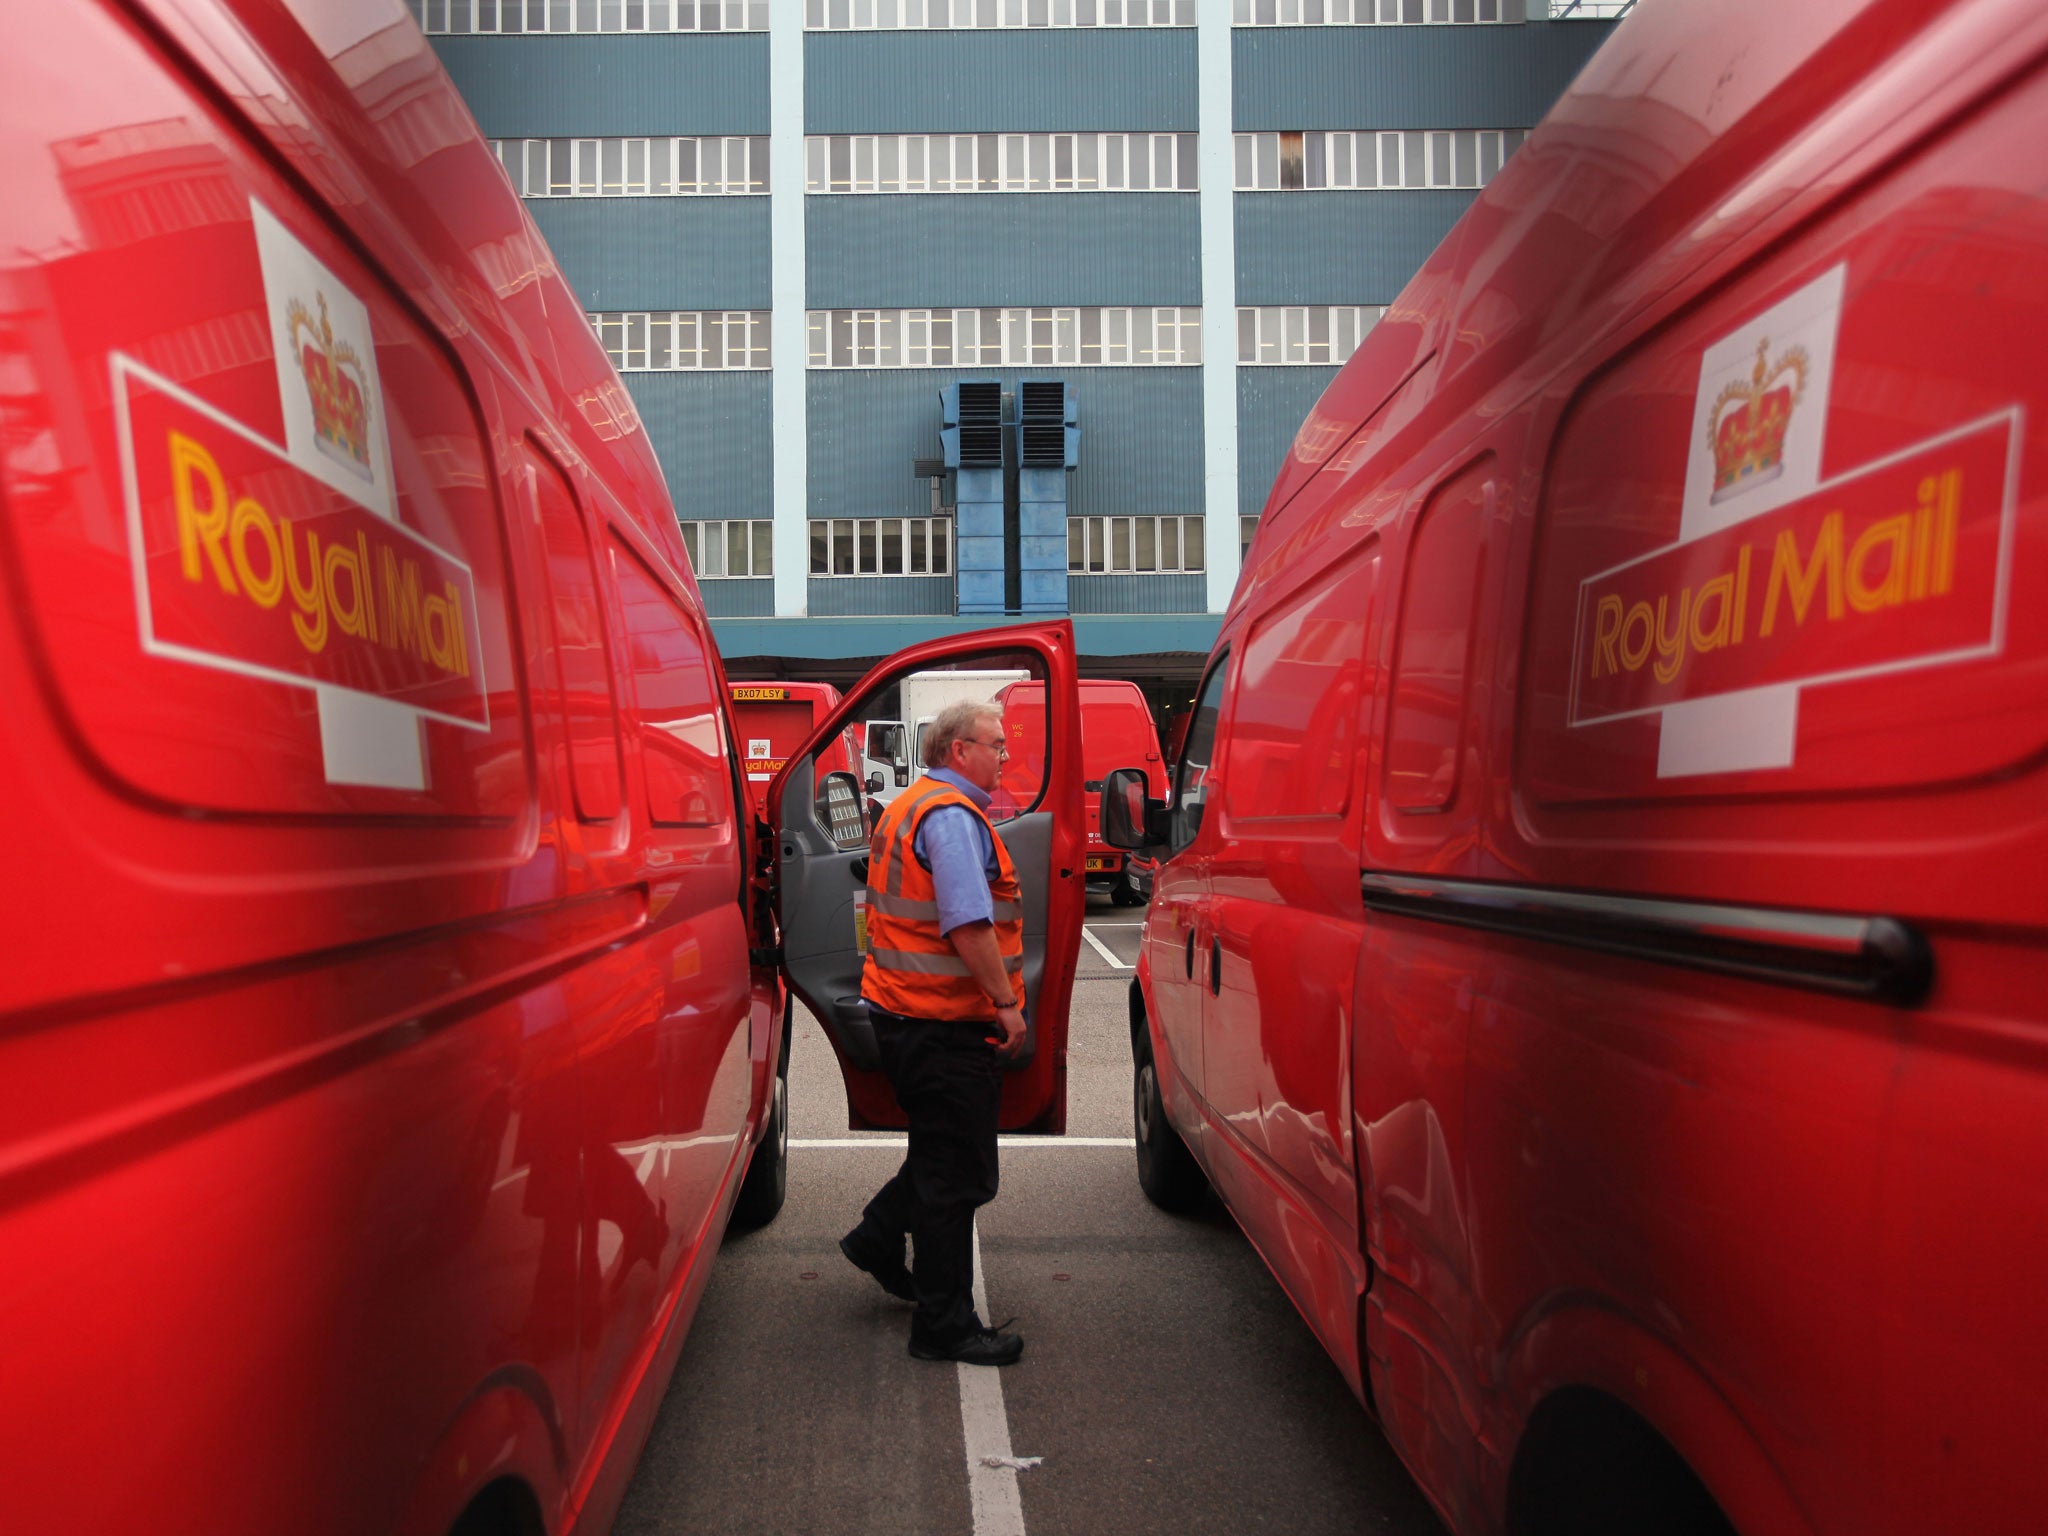 A Royal Mail employee steps out of a delivery van at the Rathbone Place Royal Mail depot in London 